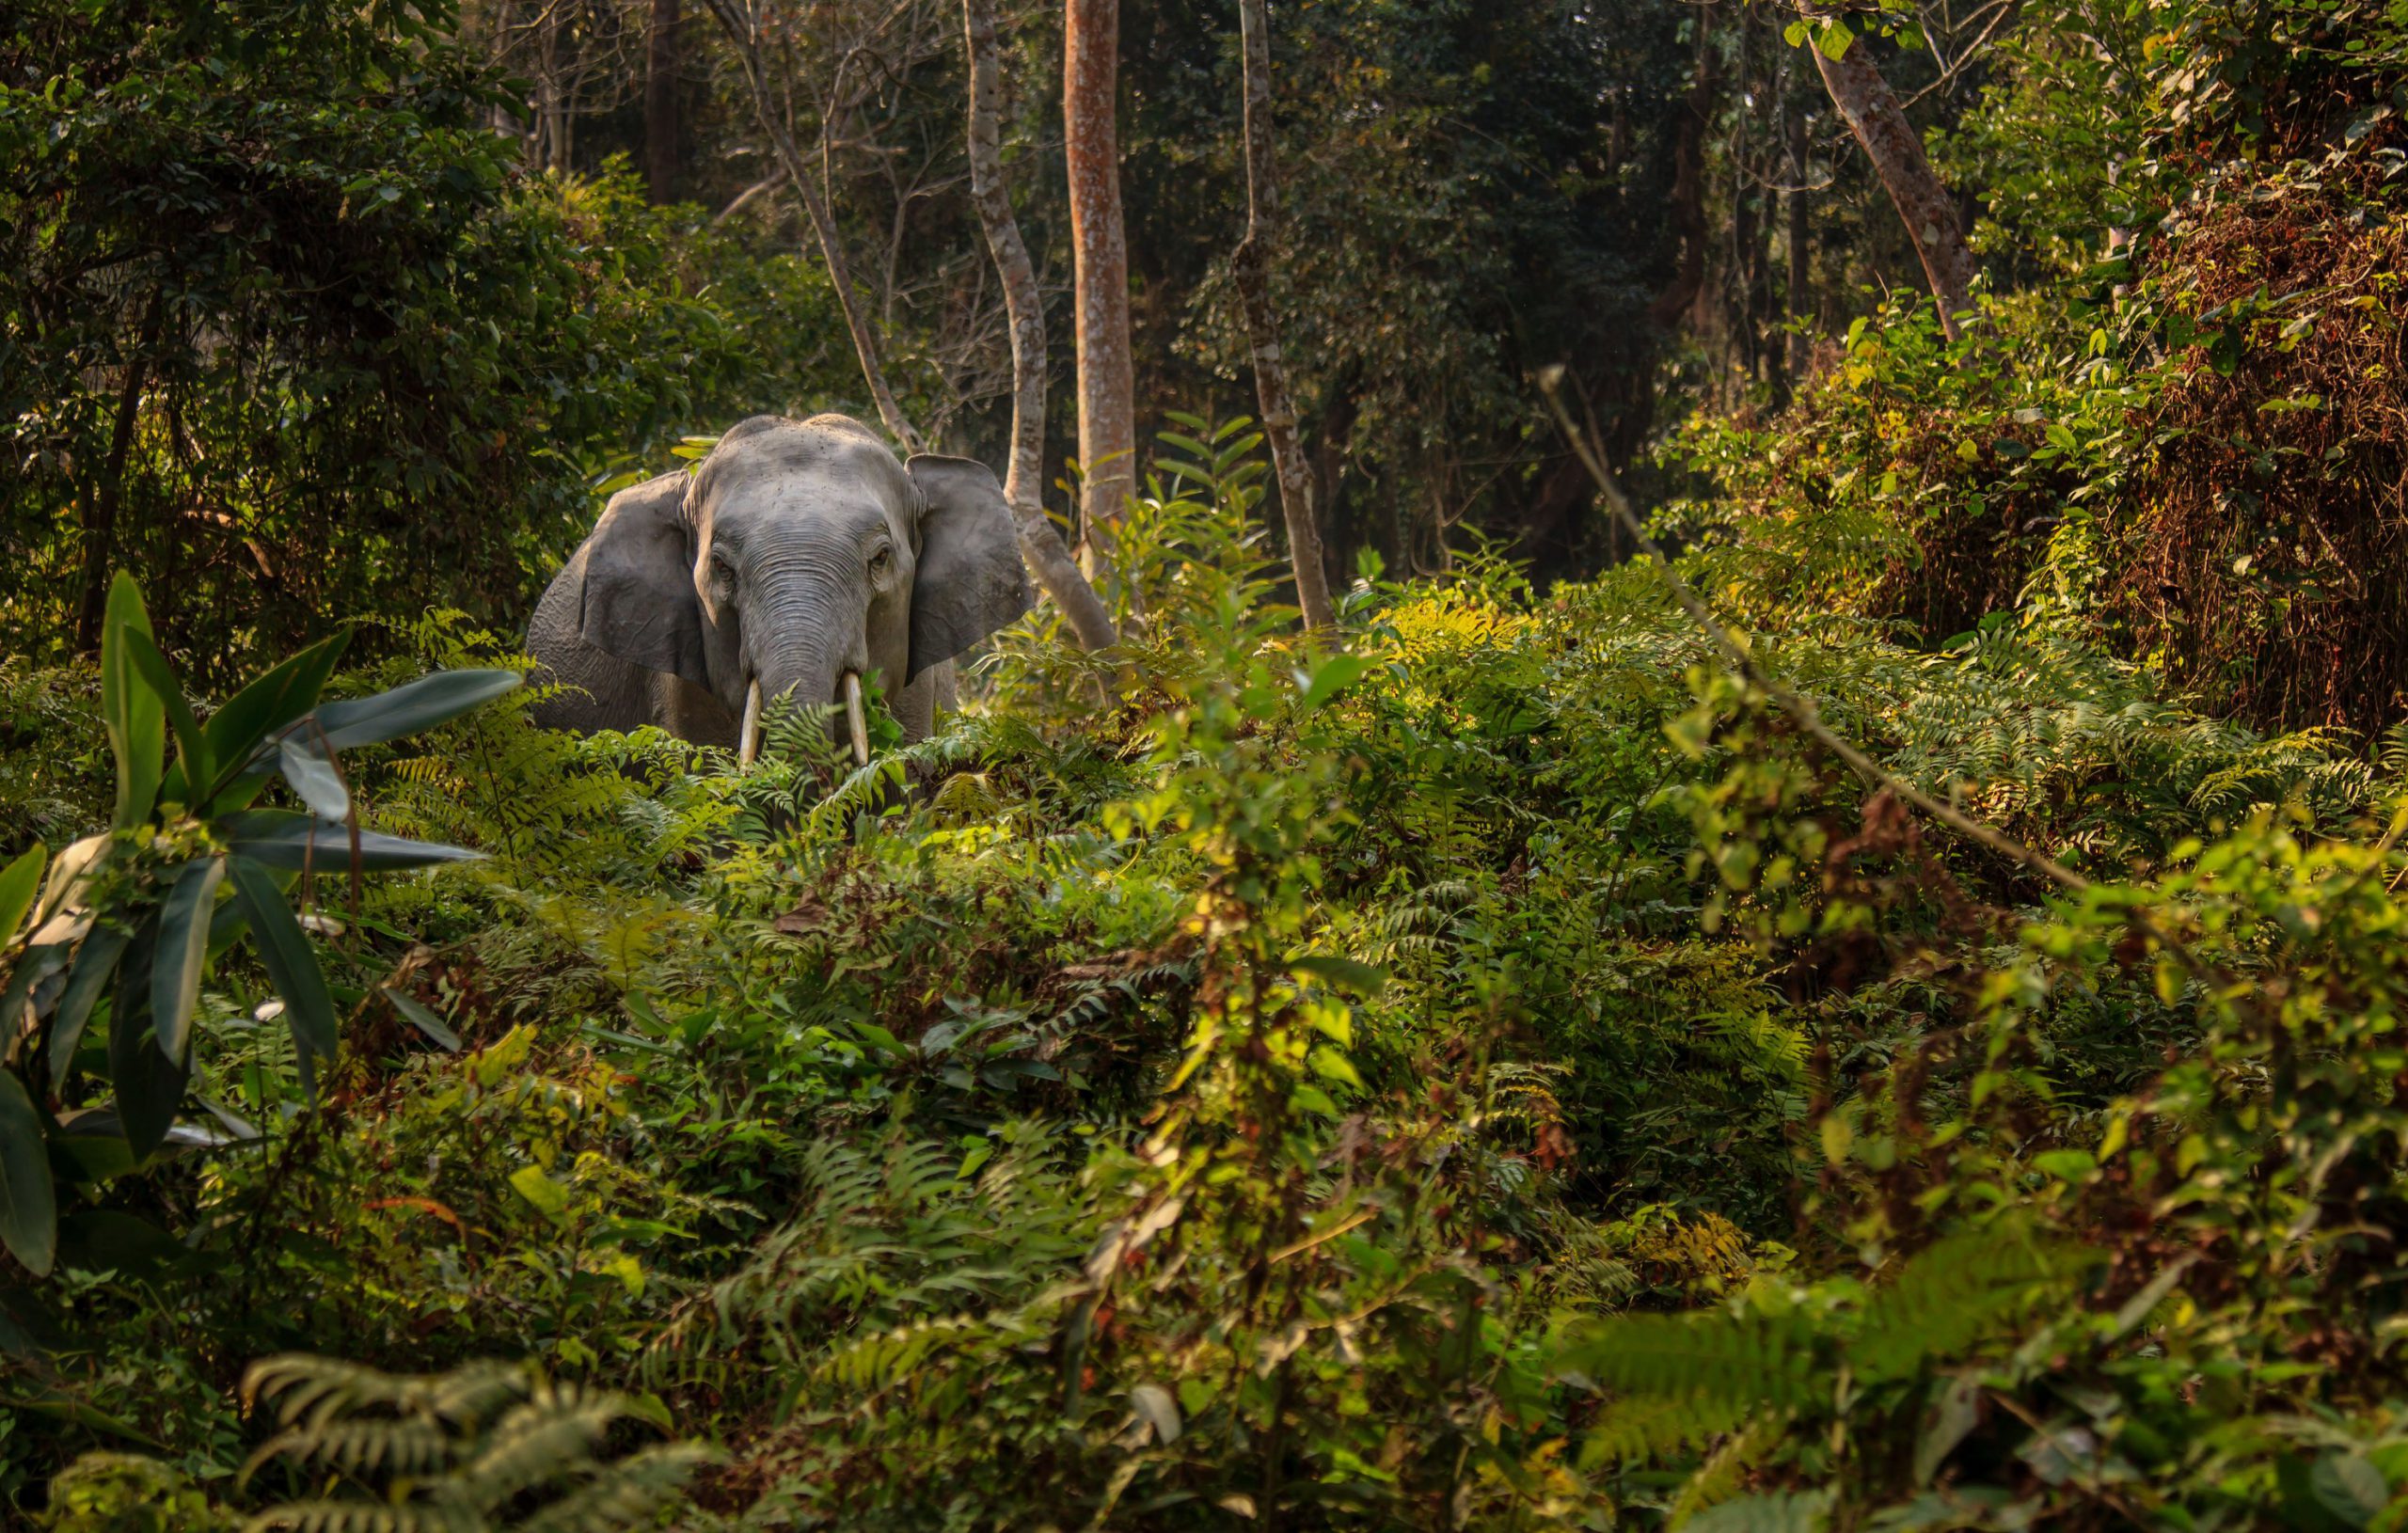 <p>The nature conservation sector is projected to grow 4-6% per year compared with less than 1% for agriculture, timber and fisheries. The protected forest in Kaziranga, Assam, India (pictured here), generates significant revenue and employment [image: Alamy]</p>